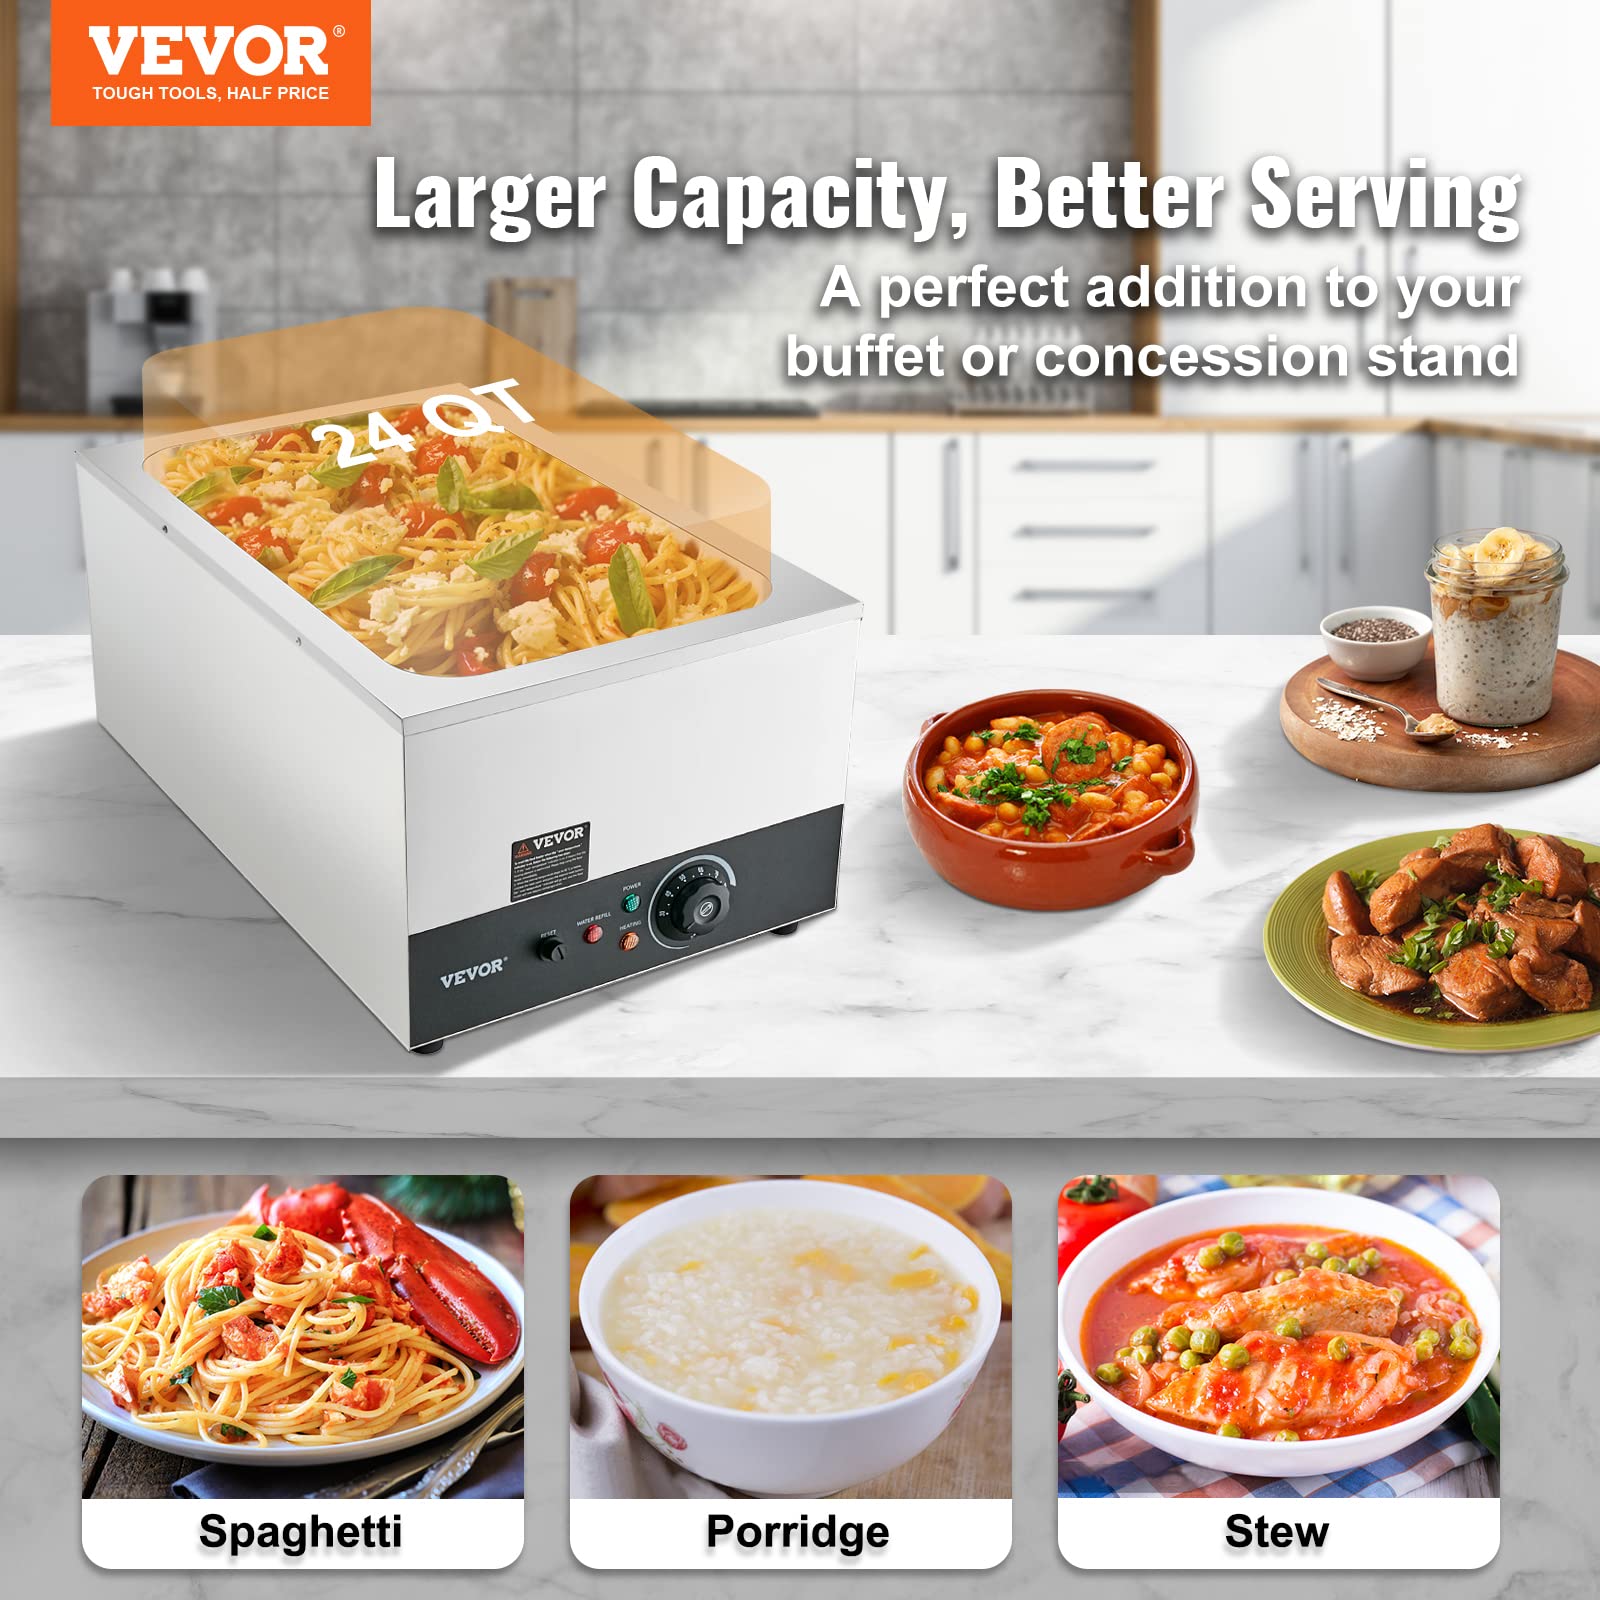 VEVOR Commercial Food Warmer 24QT Bain Marie 1200W Electric Buffet Warmer Steam Table Food Warmer Countertop Stainless Steel Food Warmer Wet or Dry Use for Parties, Catering and Restaurant